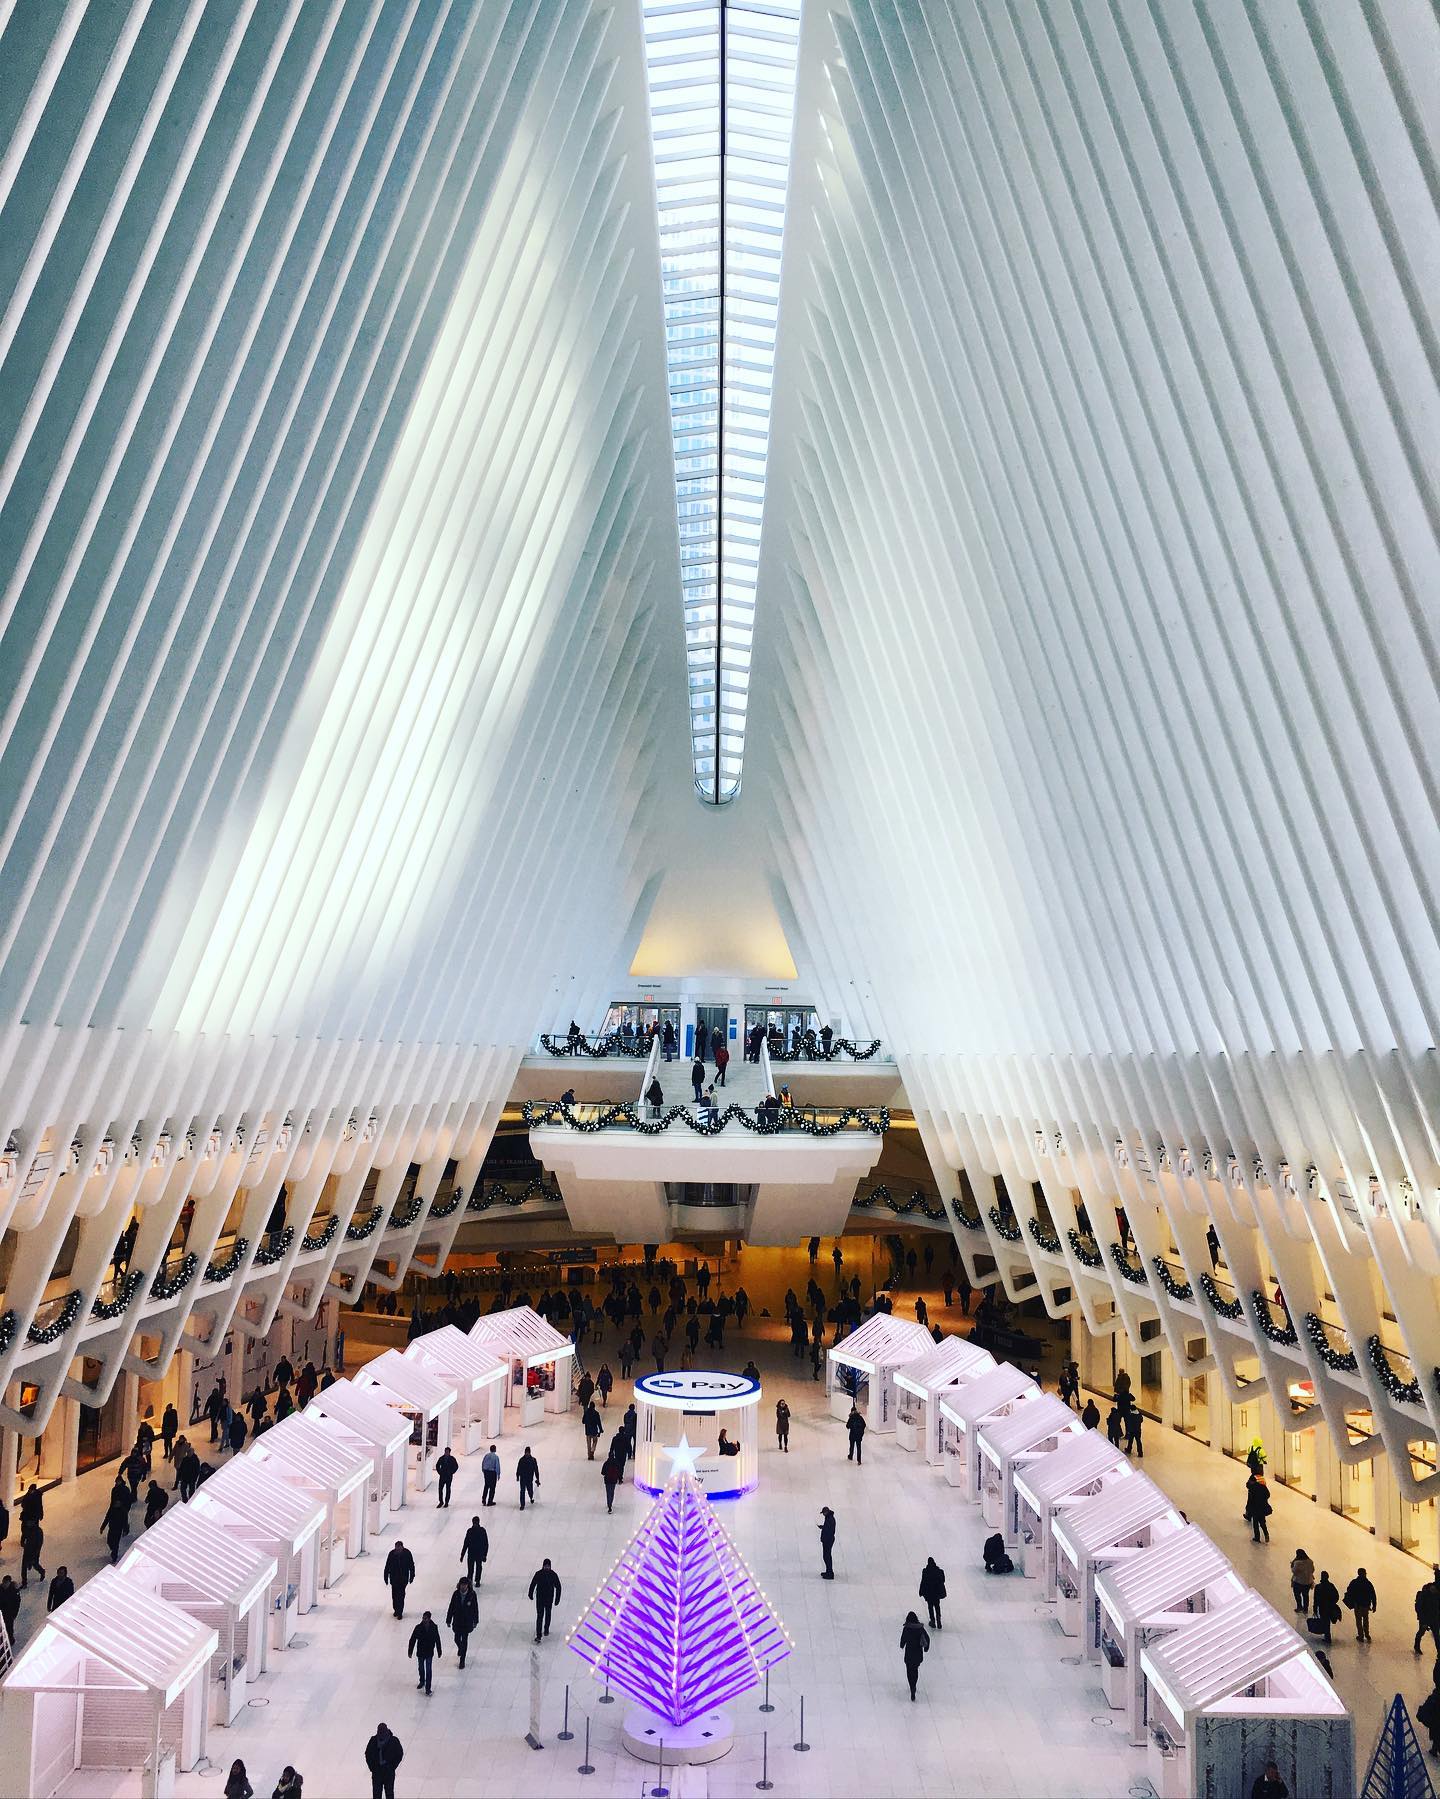 The Oculus, NYC, New York
The Oculus a transportation hub, plaza and shopping mall adjacent to the memorial site for the September 11, 2001 terror attacks. For us is the Oculus, with its sleek and modern design, one of New York’s most beautiful structures.
Which New York structure is your favorite?

#usa #usatravel #usatravels #usatrip #citytrip #citytravel #newyork #nyc #ny #newyorkcity #newyork_ig #newyork_instagram #newyorkphotography #newyorkpictures #lowermanhattan #theoculus #traveller #travellove #newyorklove #newyorkliebe #buildings #buildingswow #amazingstructure #travelgram #travelblog #travelblogger #reiseblog #reiseblogger #instatravel #instatraveling